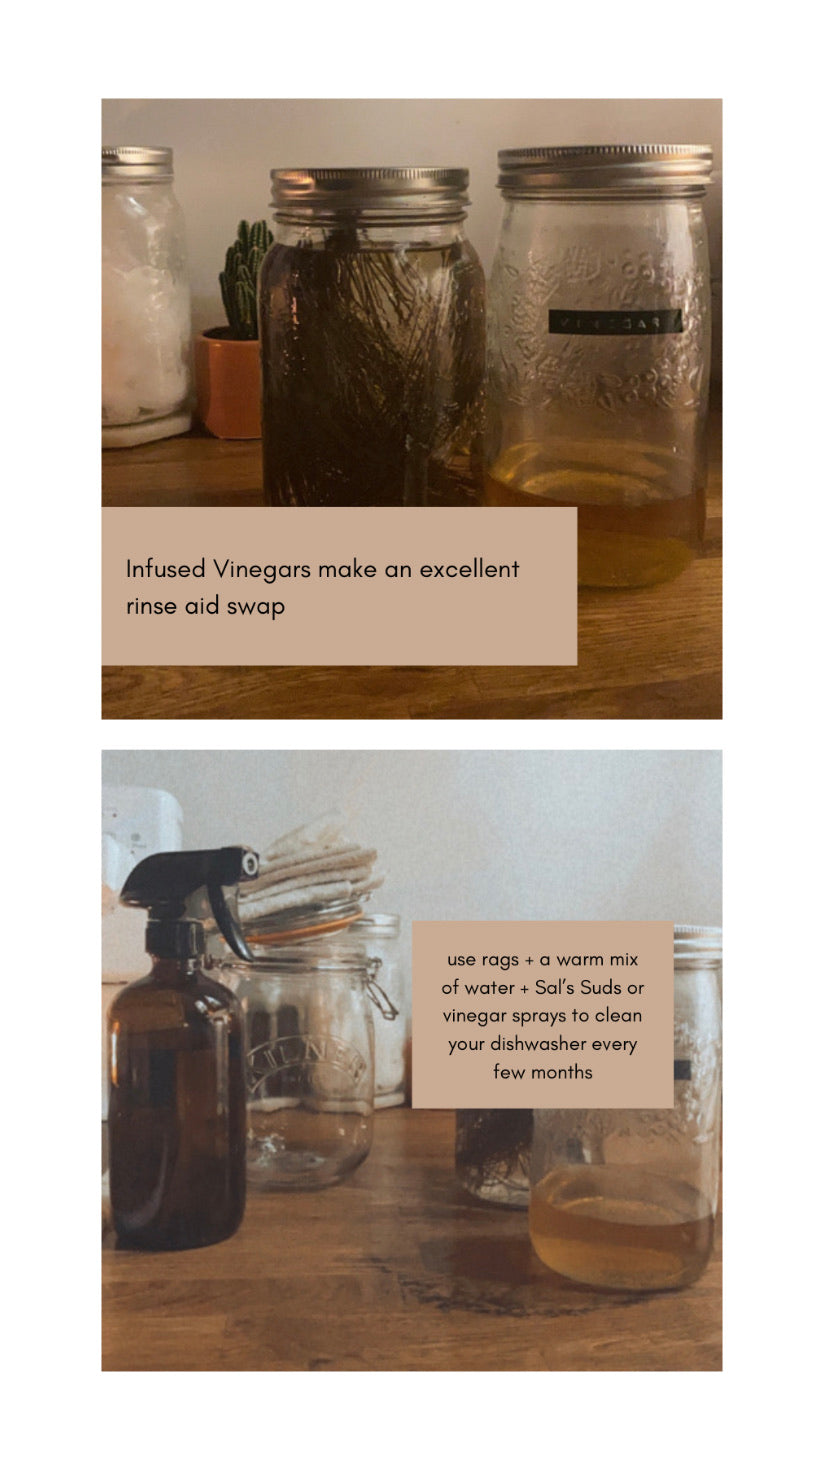 12% Cleaning Vinegar | The Unscented Co.